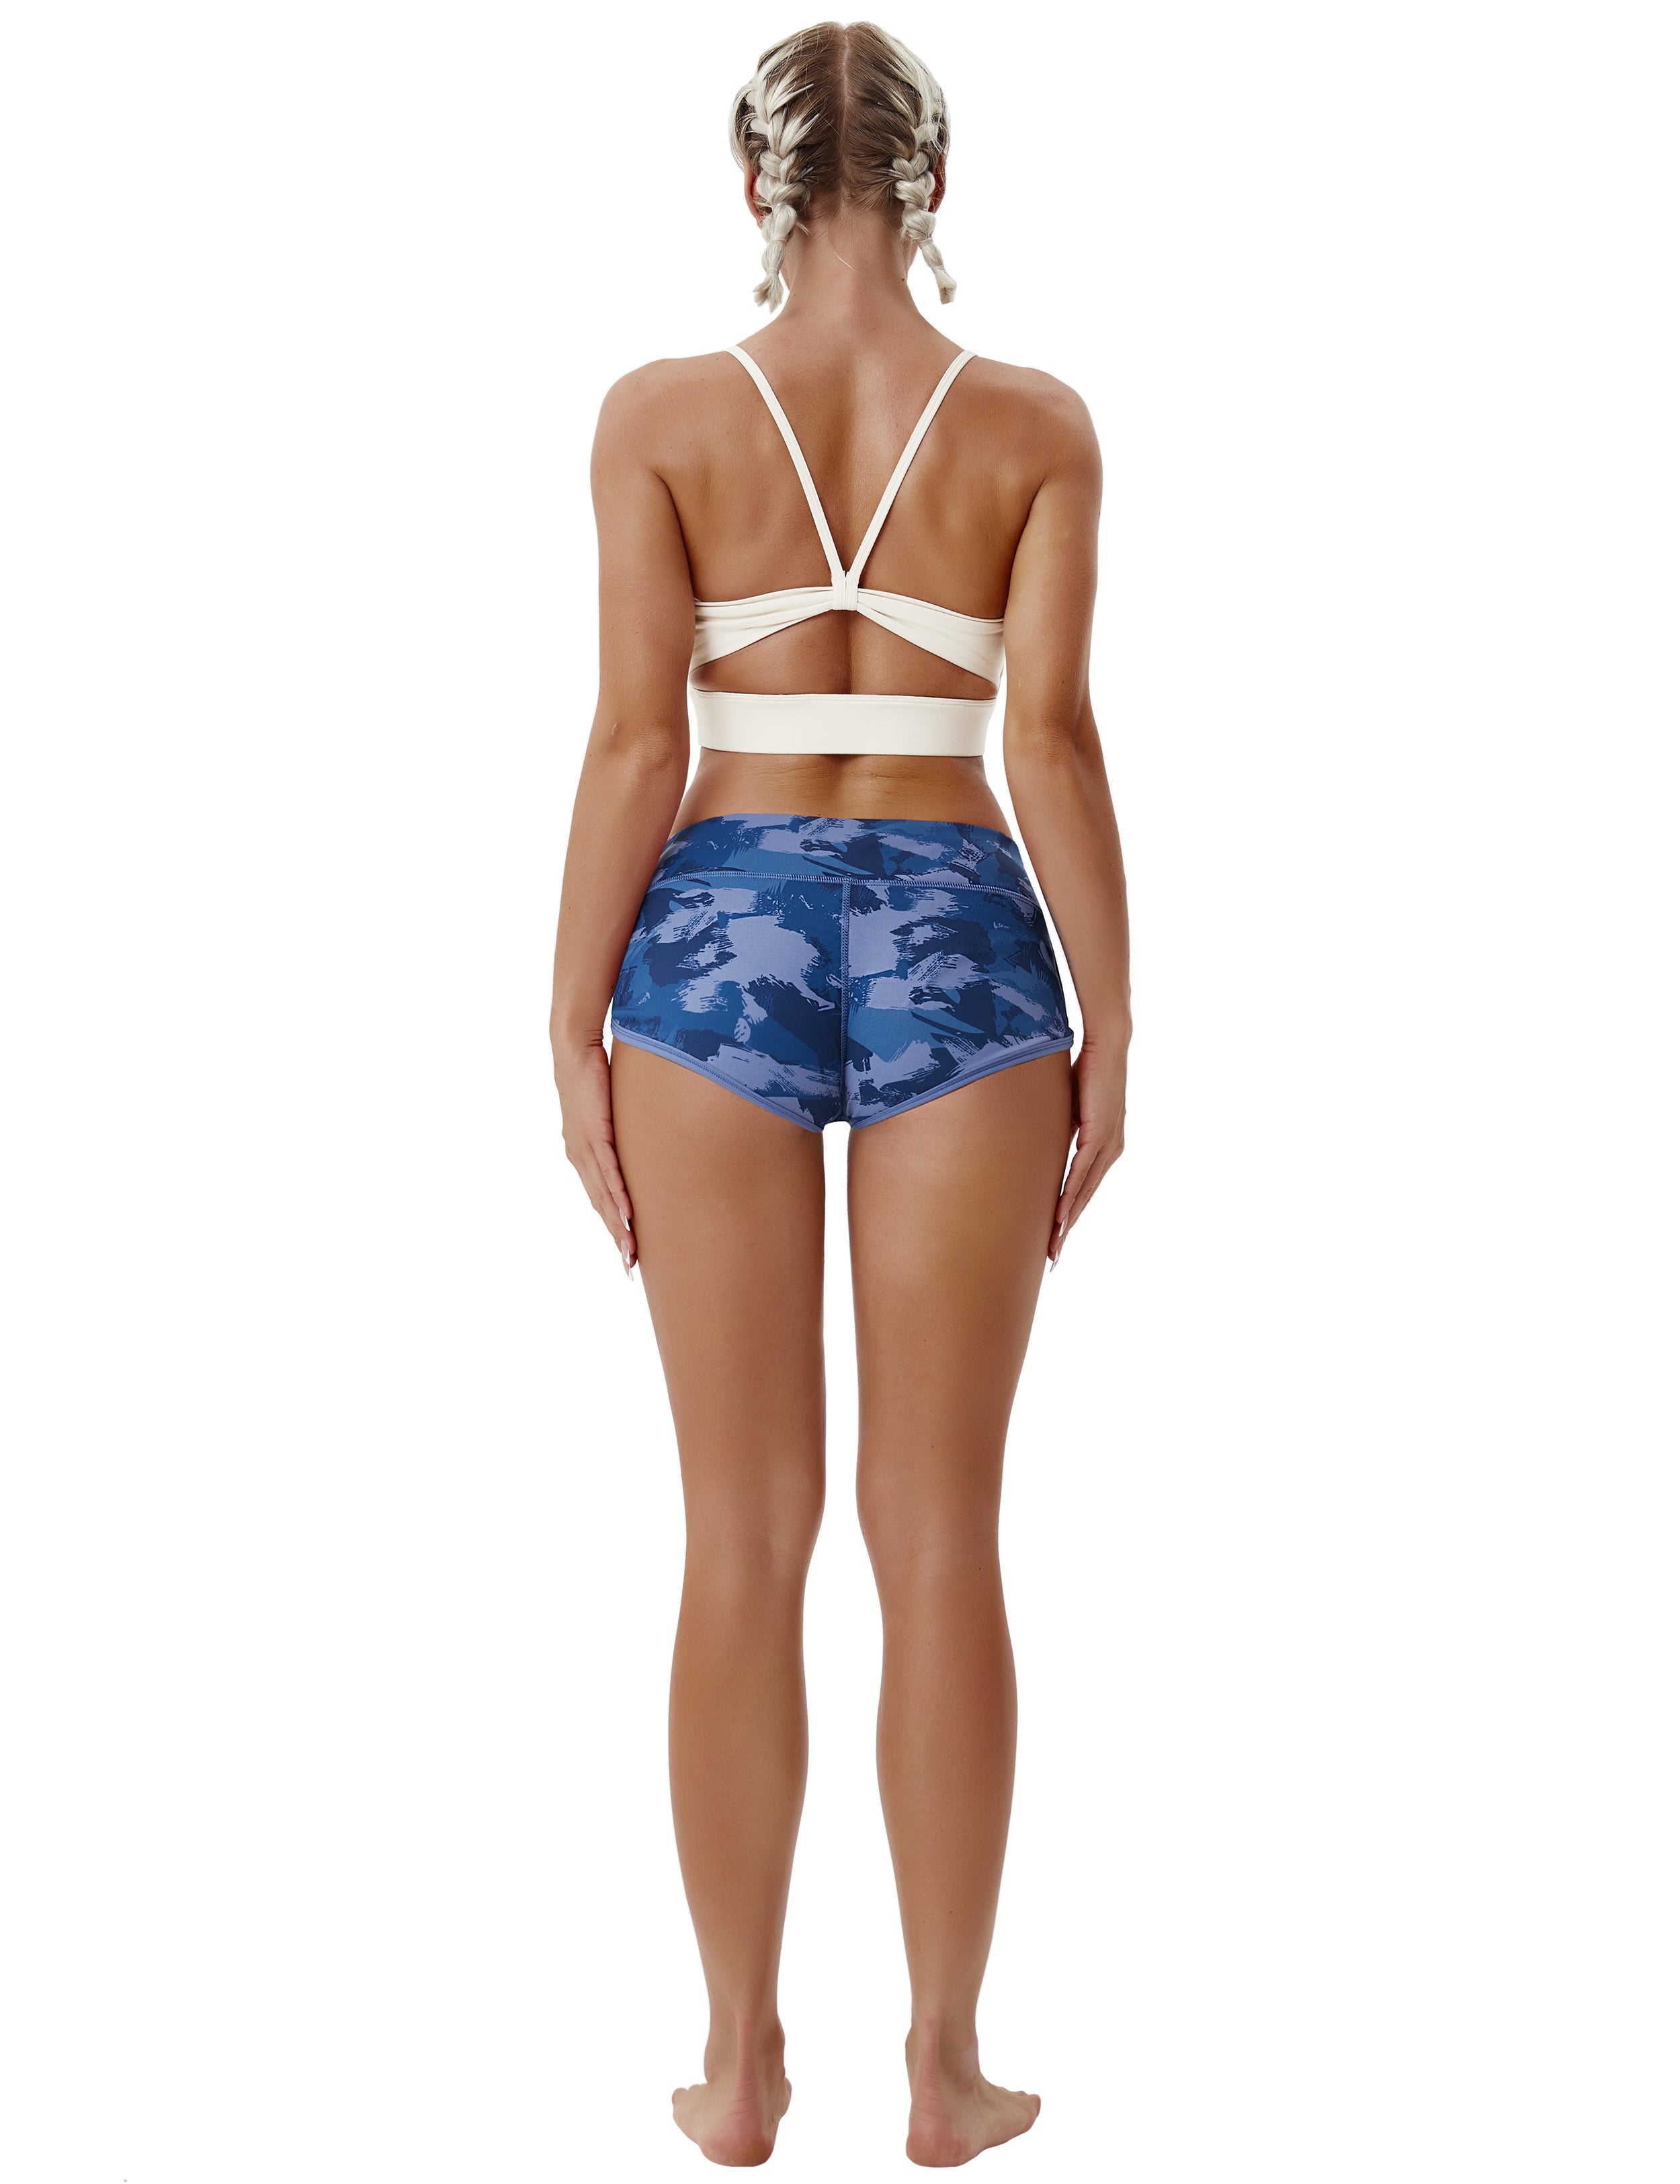 Printed Booty Yoga Shorts navy brushcamo Sleek, soft, smooth and totally comfortable: our newest sexy style is here. Softest-ever fabric High elasticity High density 4-way stretch Fabric doesn't attract lint easily No see-through Moisture-wicking Machine wash 78% Polyester, 22% Spandex